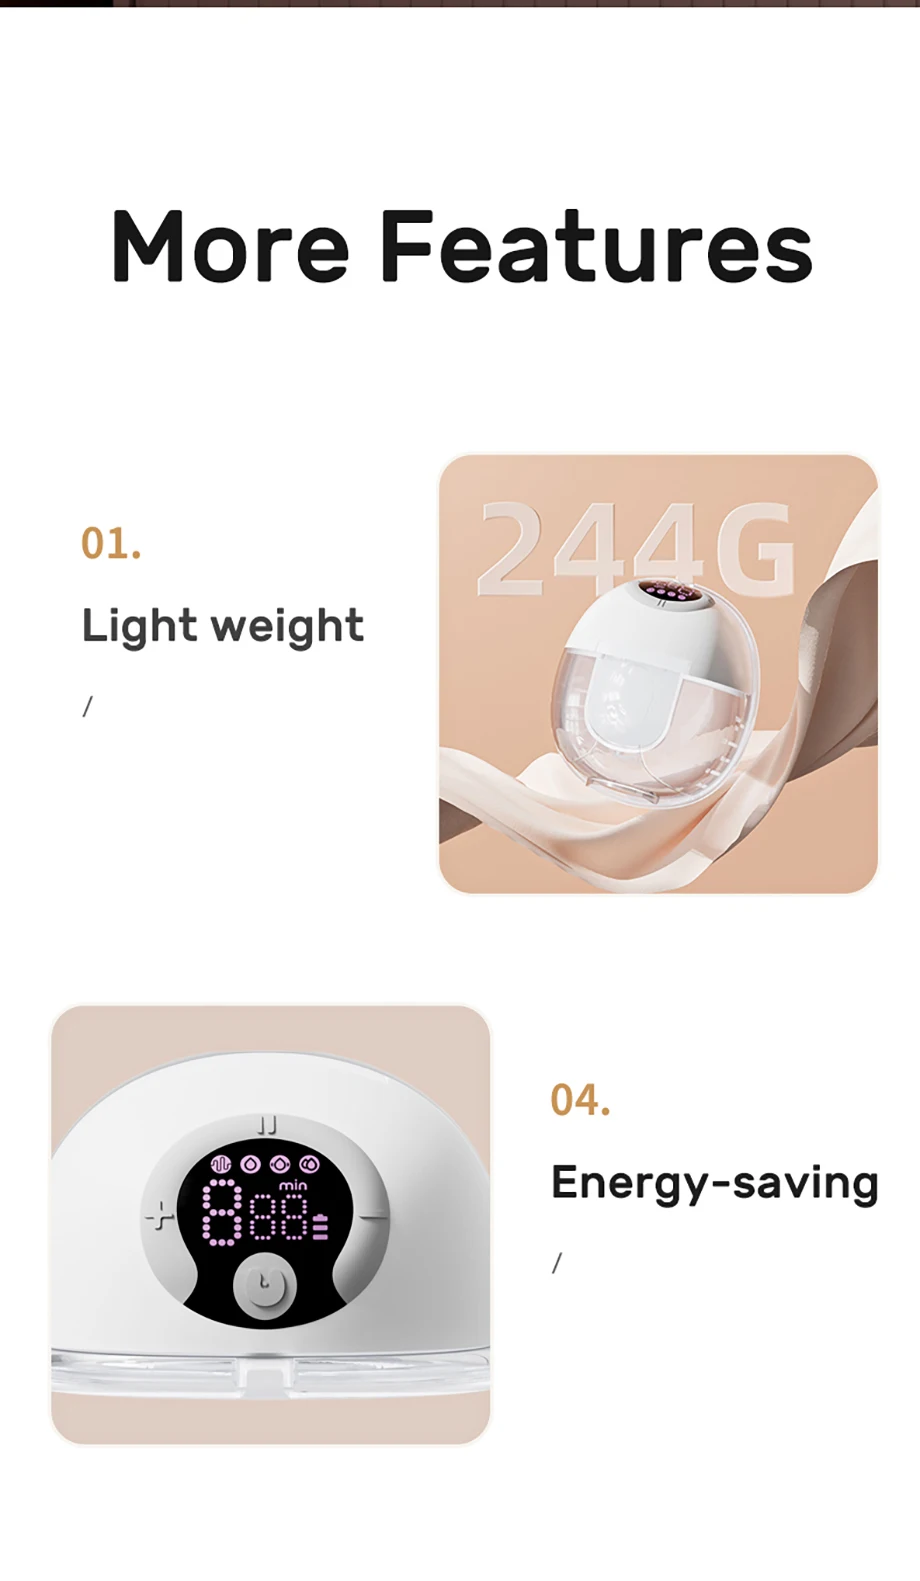 S81d7aeeec591431085a11bd8761ed64f9 NCVI Wearable Breast Pump, Hands-Free Breast Pump with 4 Modes & 9 Levels, Portable Breast Pump, Low Noise & Discreet, 24mm